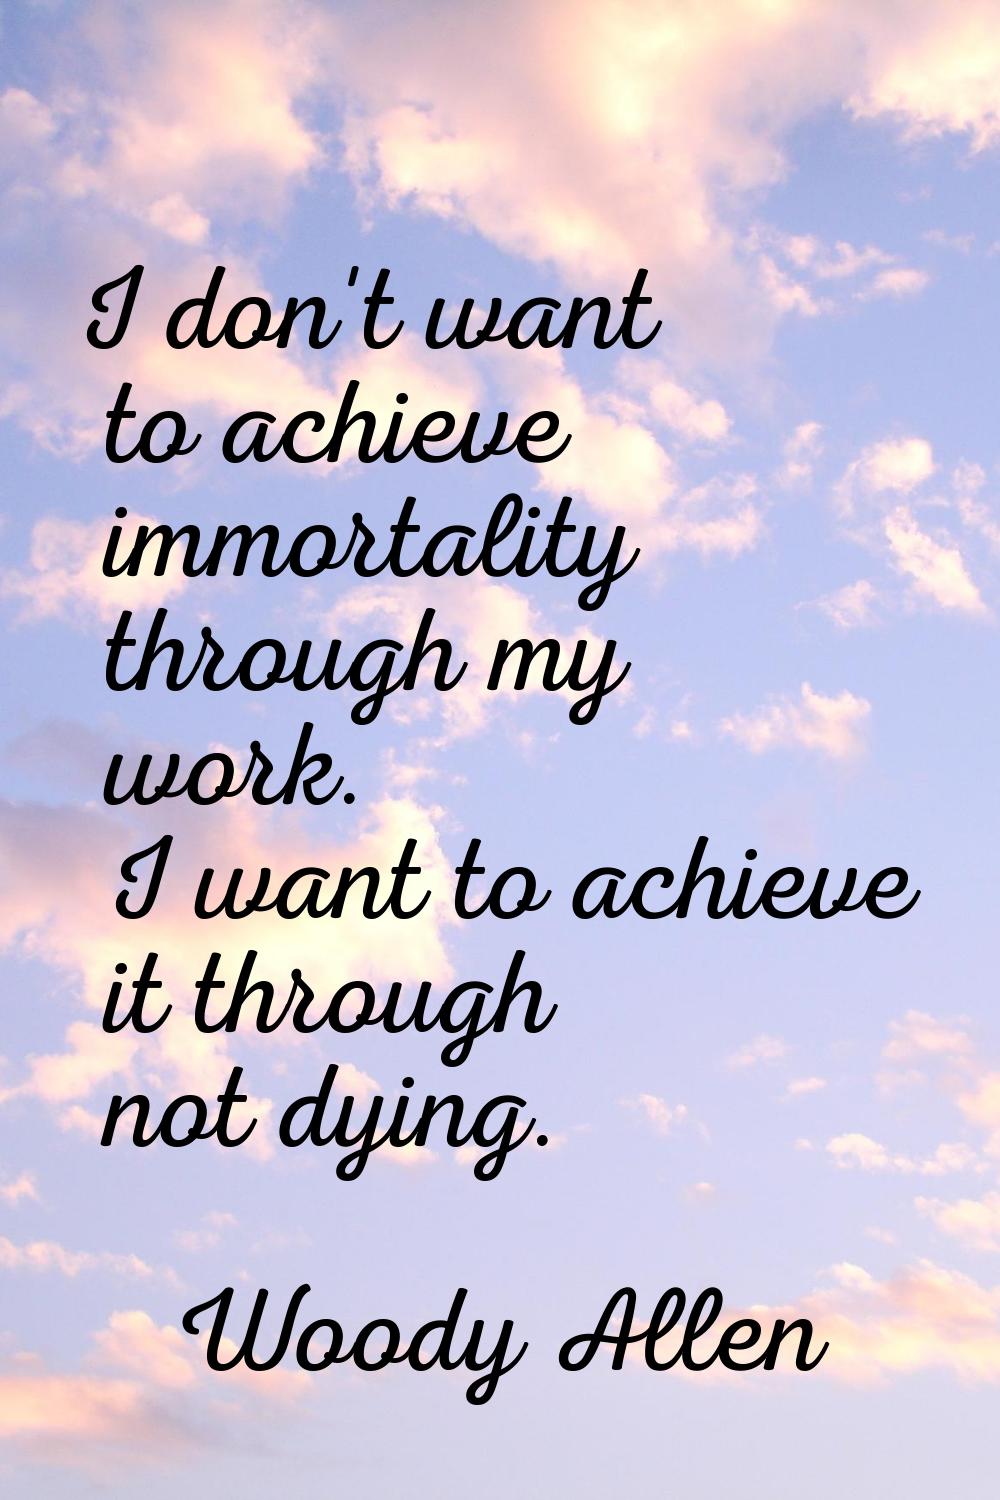 I don't want to achieve immortality through my work. I want to achieve it through not dying.